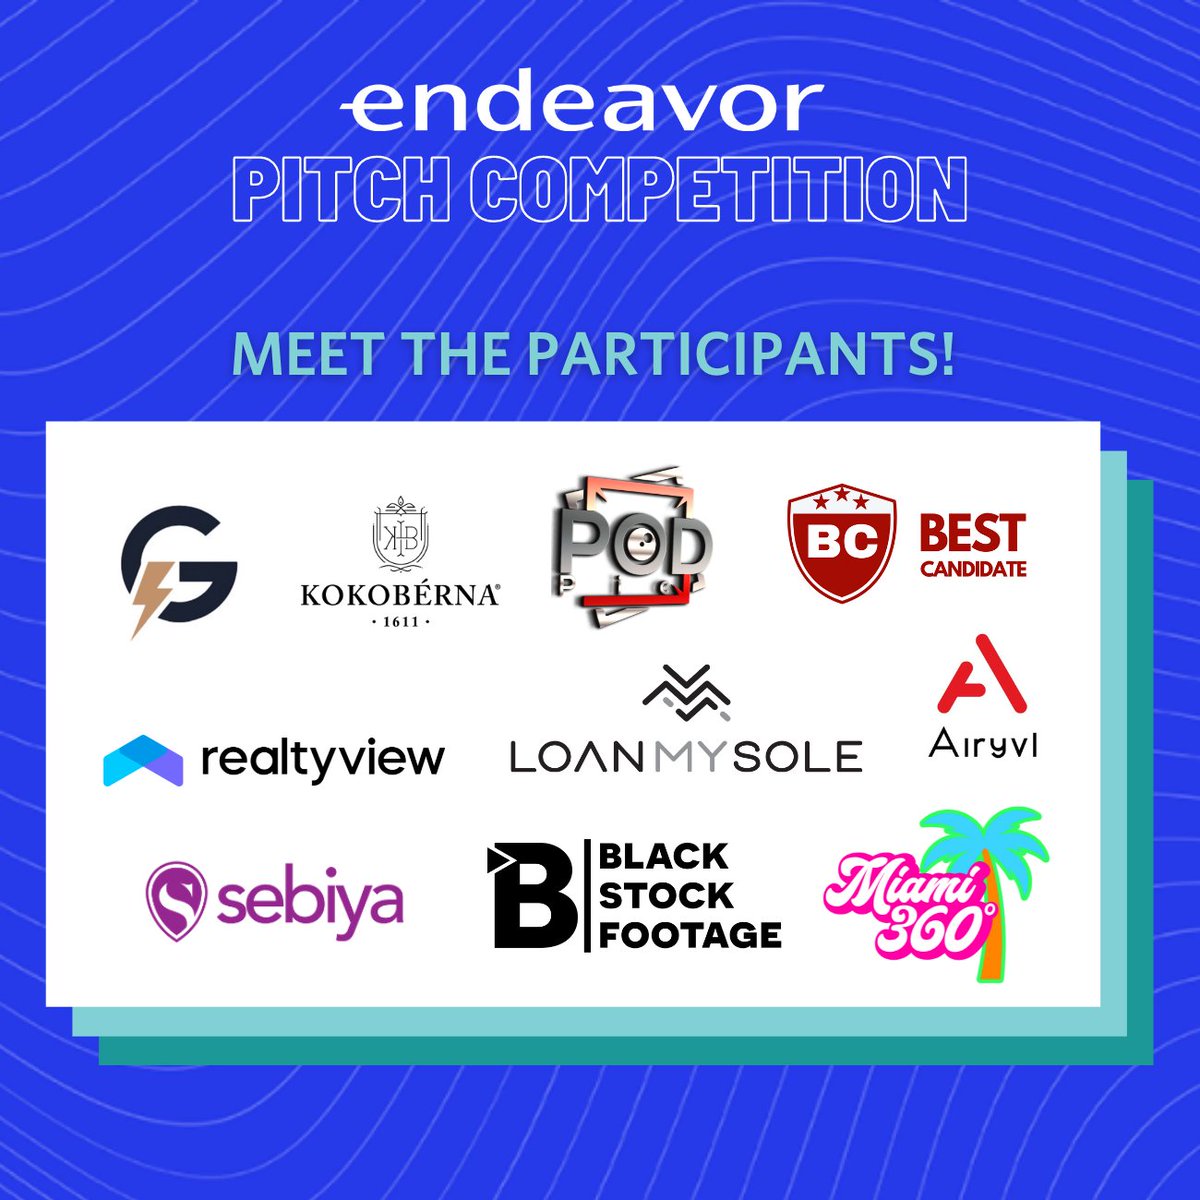 Meet the ten entrepreneurs competing this Wednesday!   Tune in on Wednesday to watch them pitch and RSVP here: …deavorpitchcompetition.splashthat.com